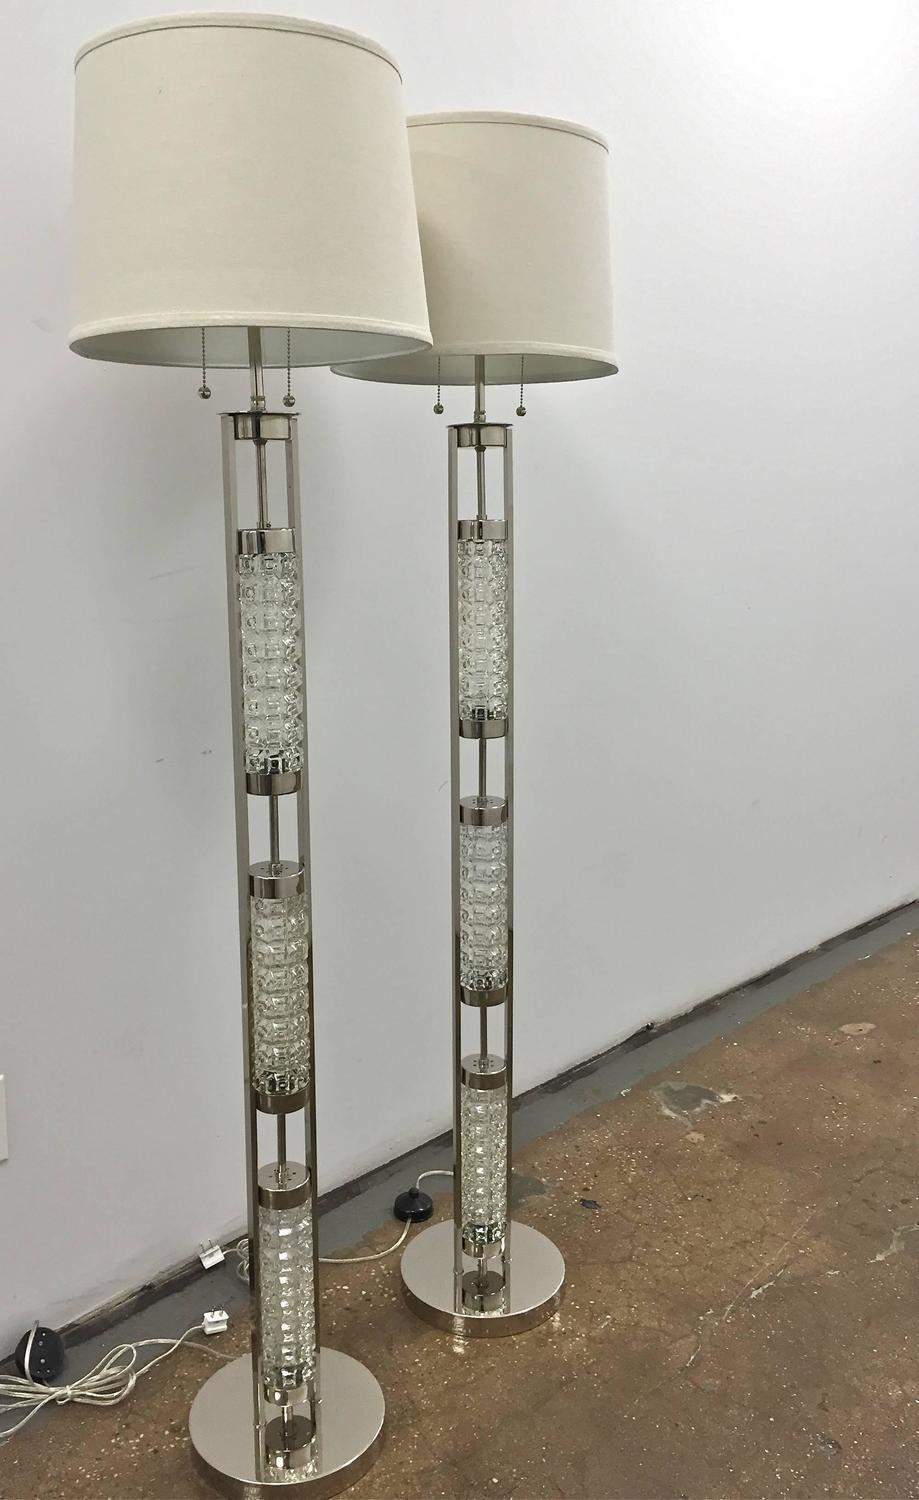 Pair of Floor Lamps in the Orrefors Style For Sale at 1stdibs